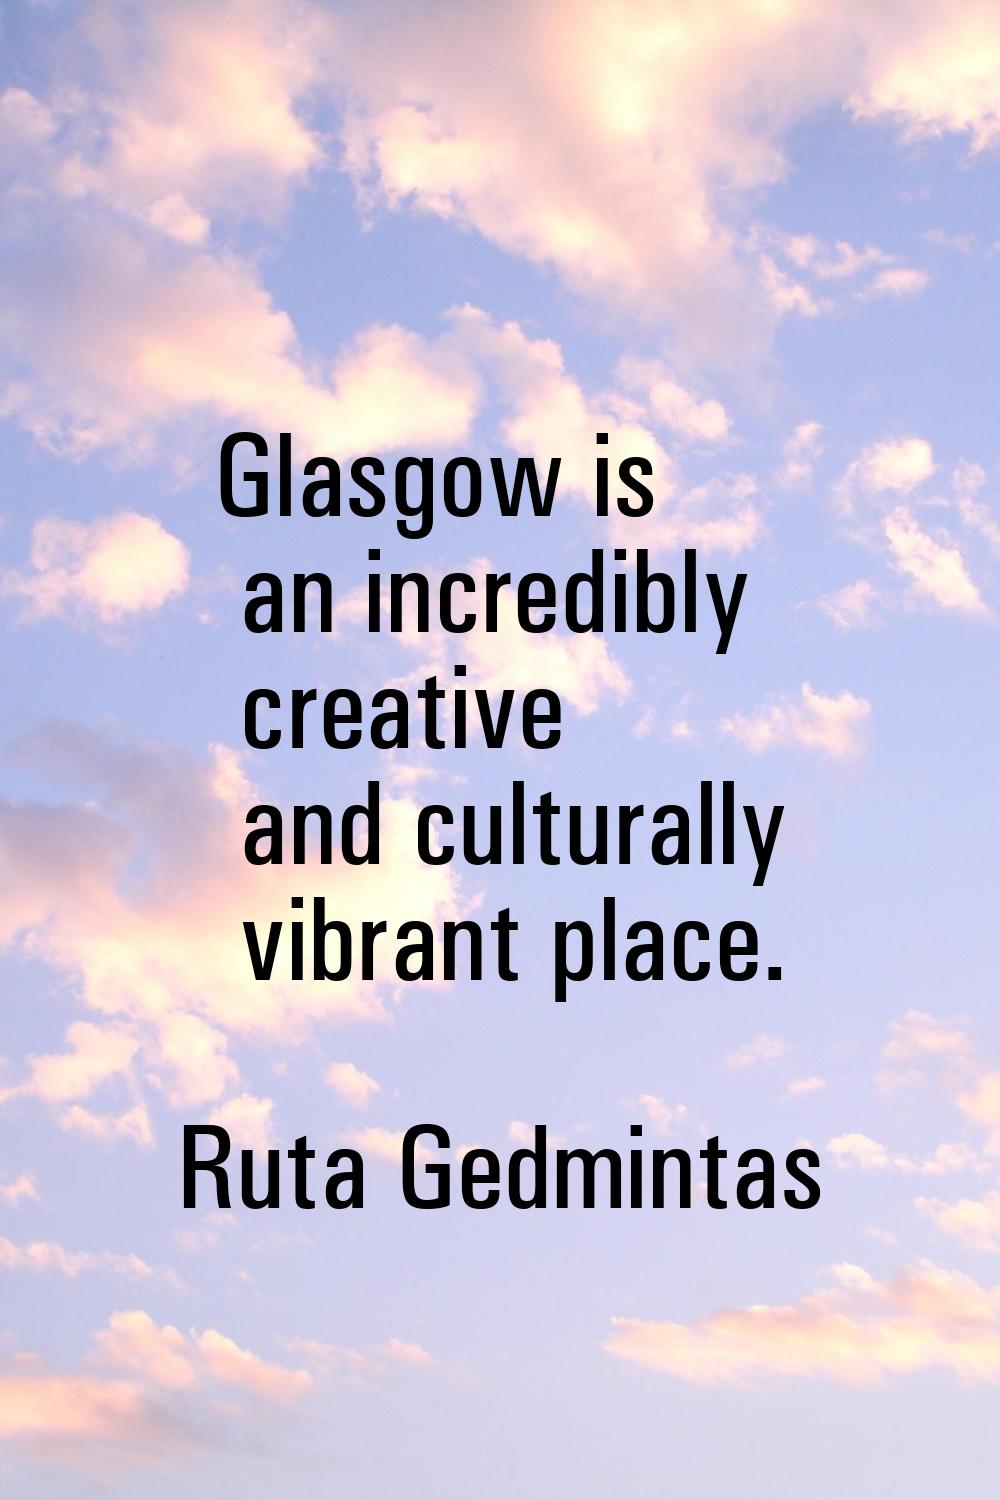 Glasgow is an incredibly creative and culturally vibrant place.